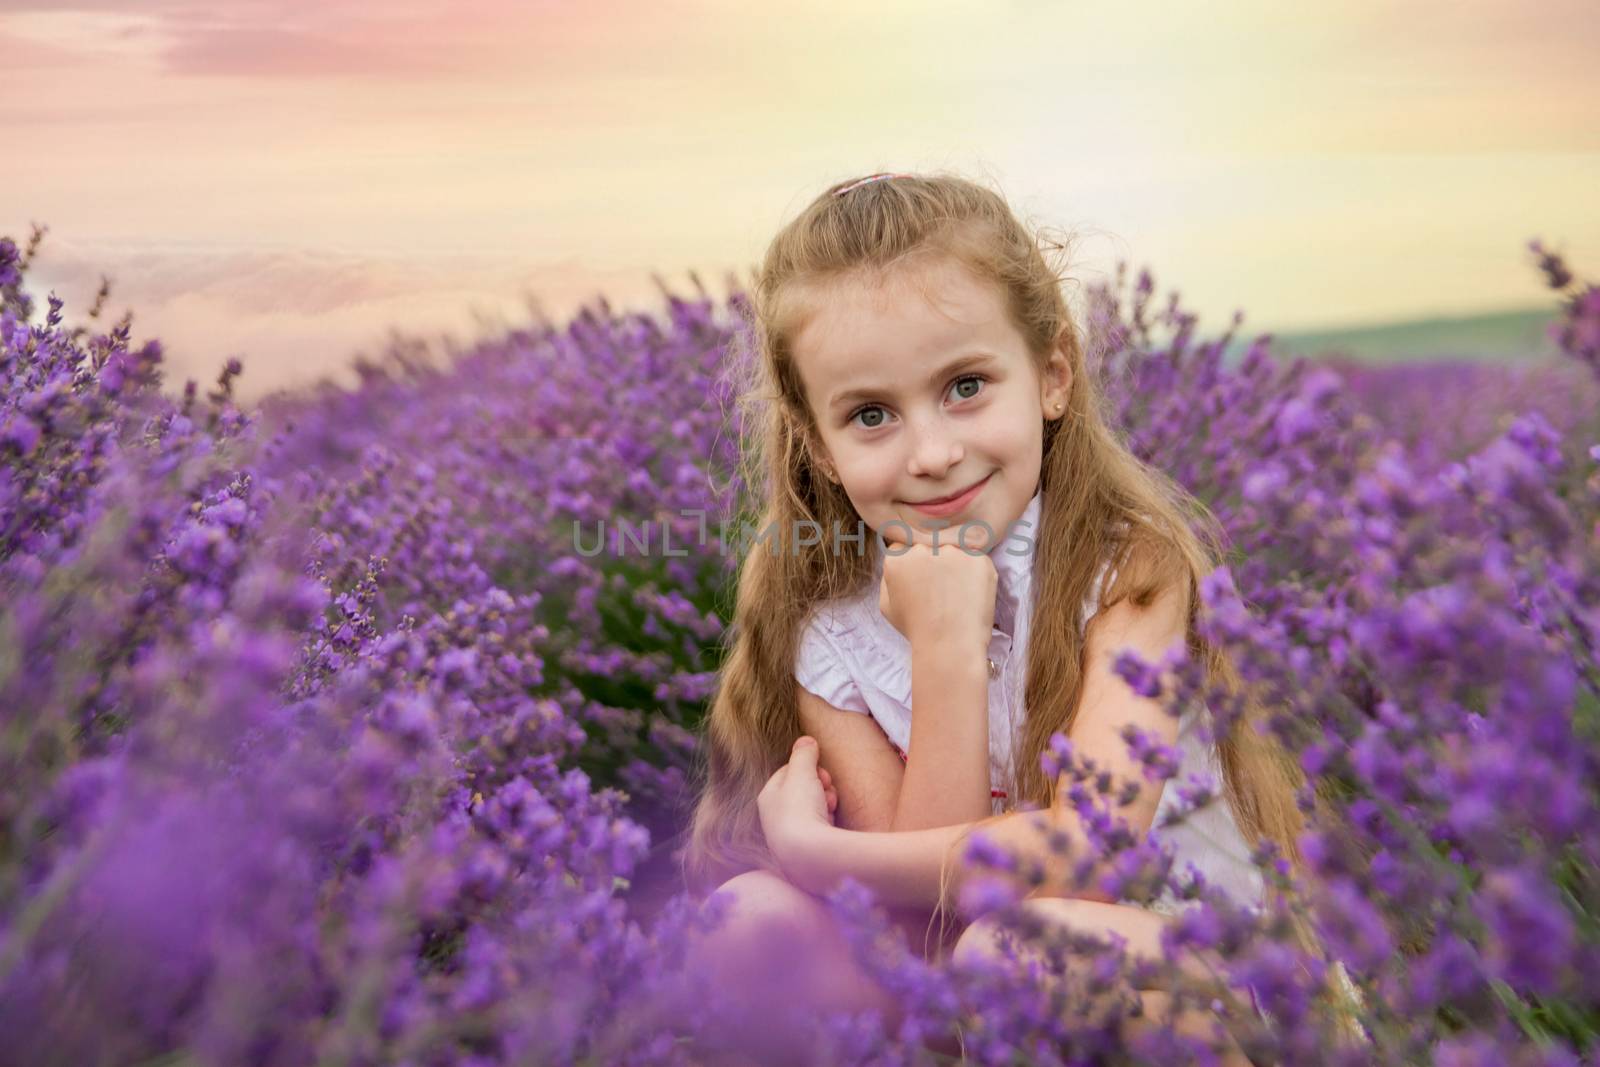 Cute girl in lavender field at sunset